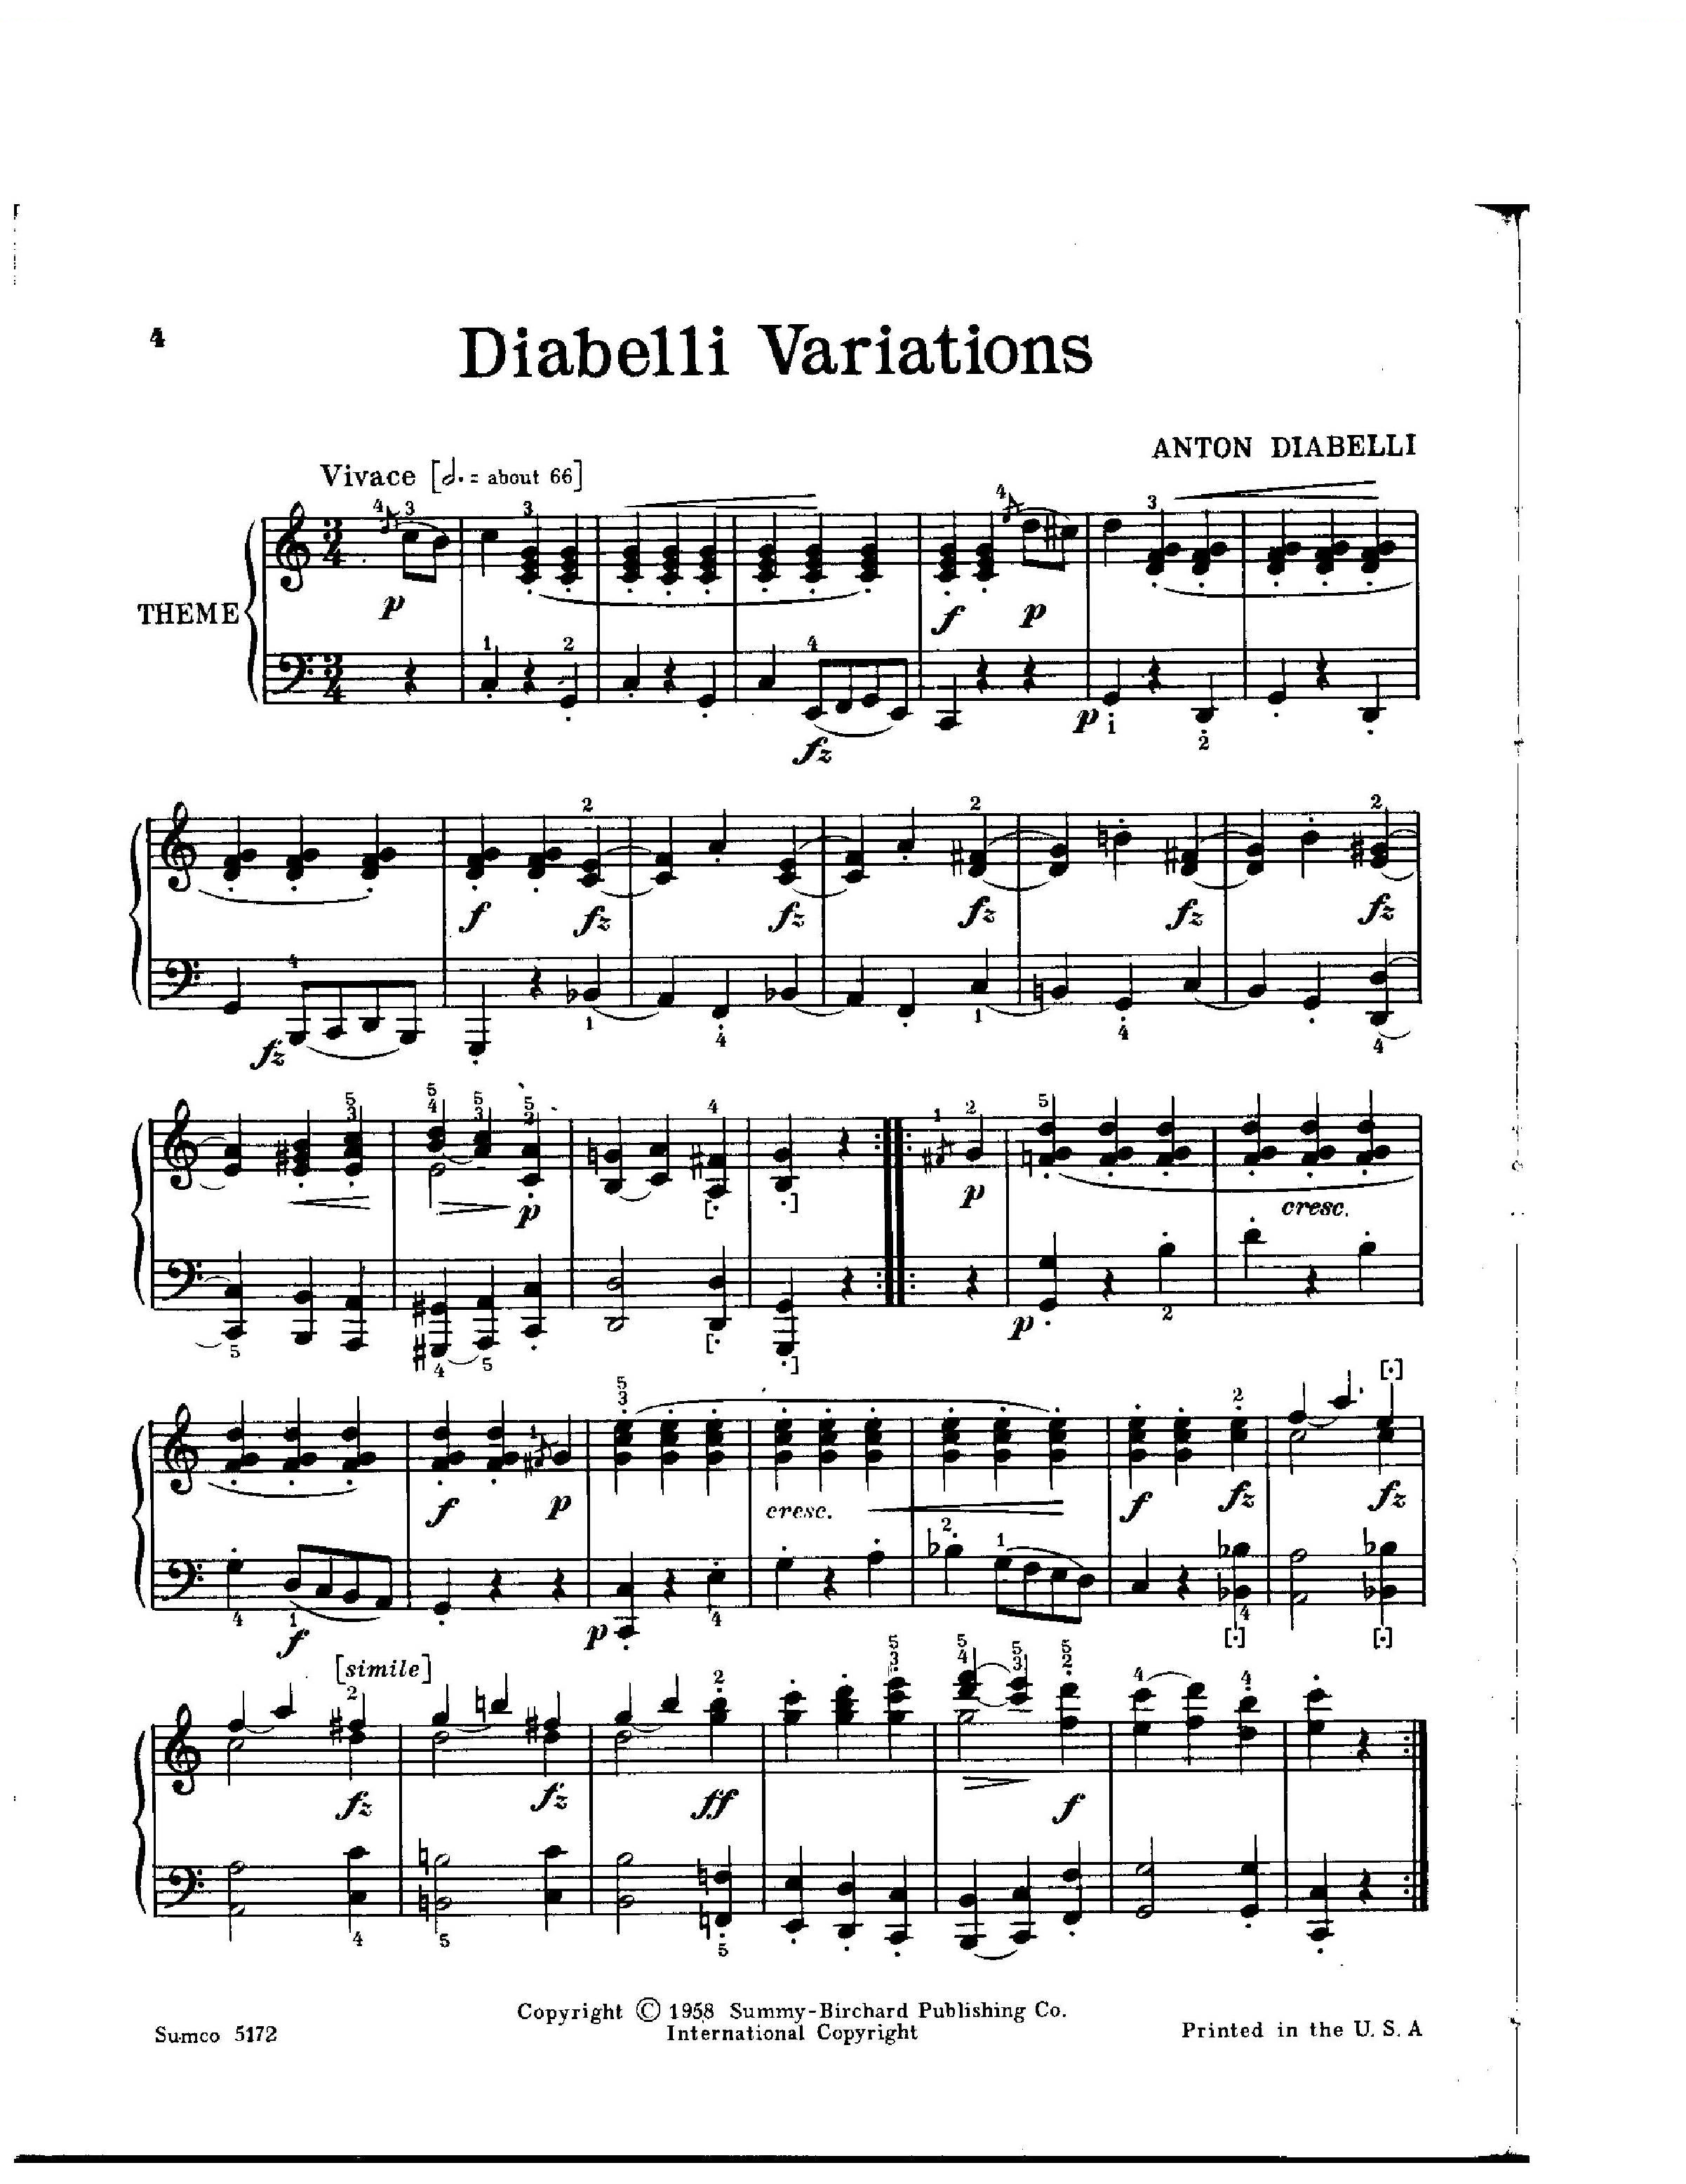 diabelli_various.variations_not_beethoven.no_cover